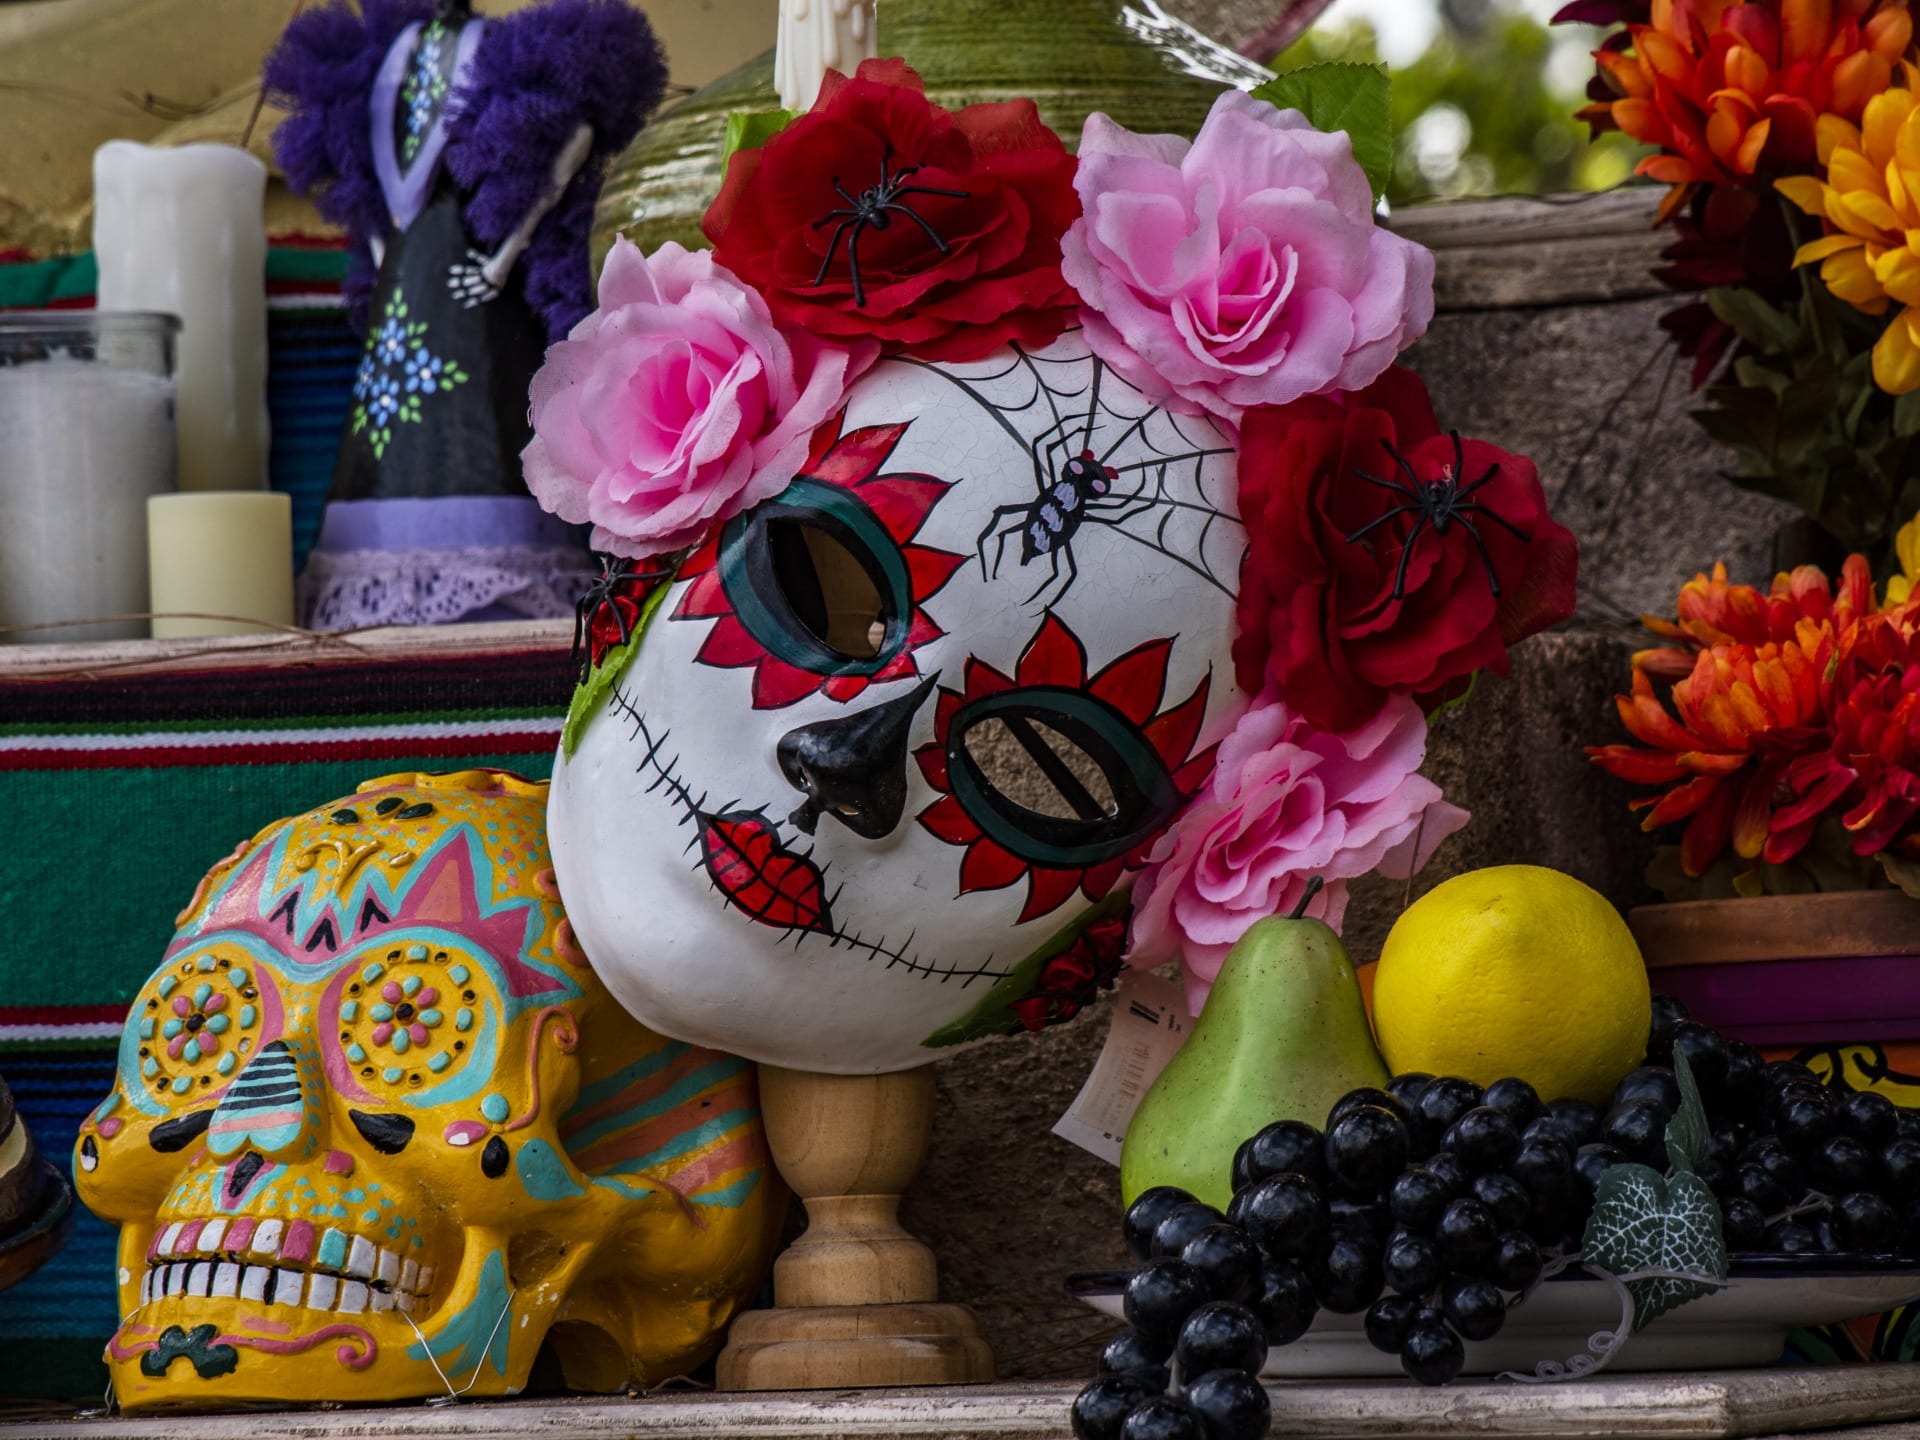 Typical Day of the Dead masks and decorations